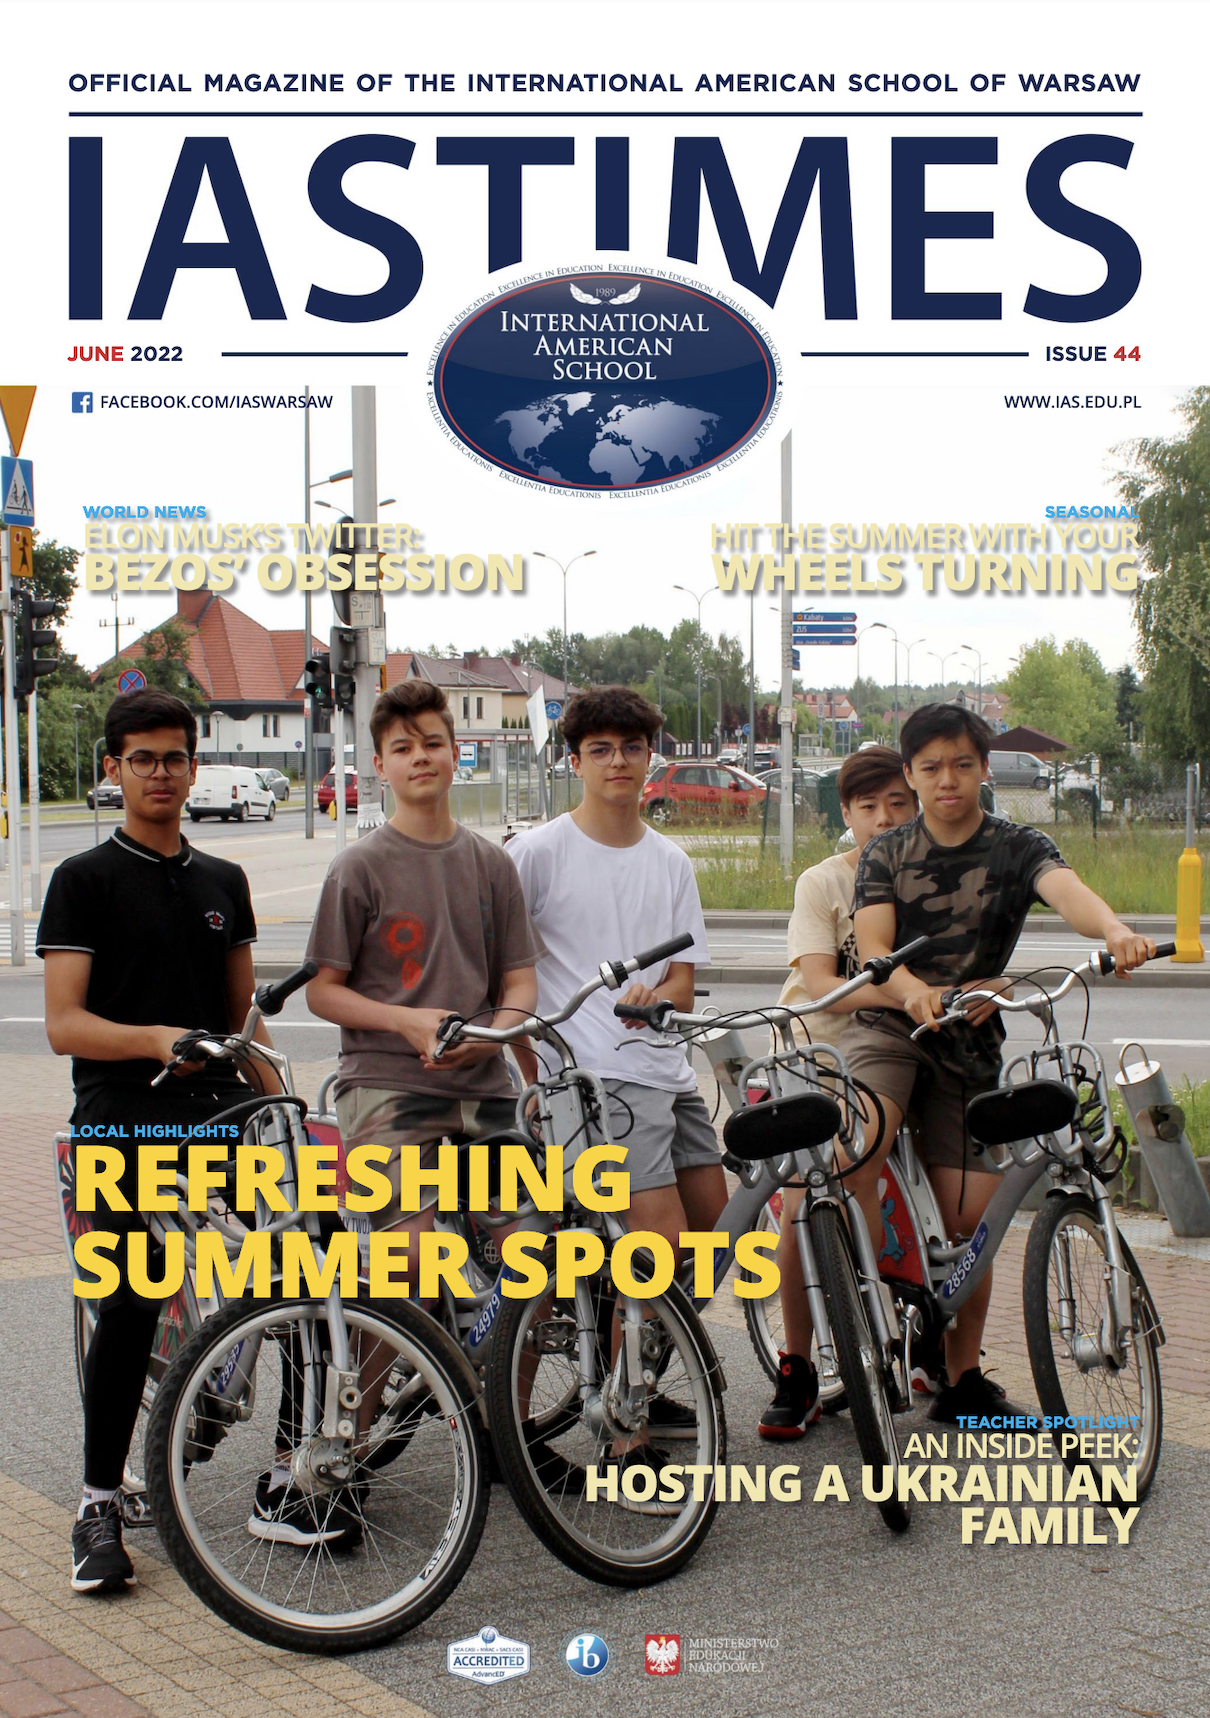 IAS Times Issue no. 44 – Digital Version – out now